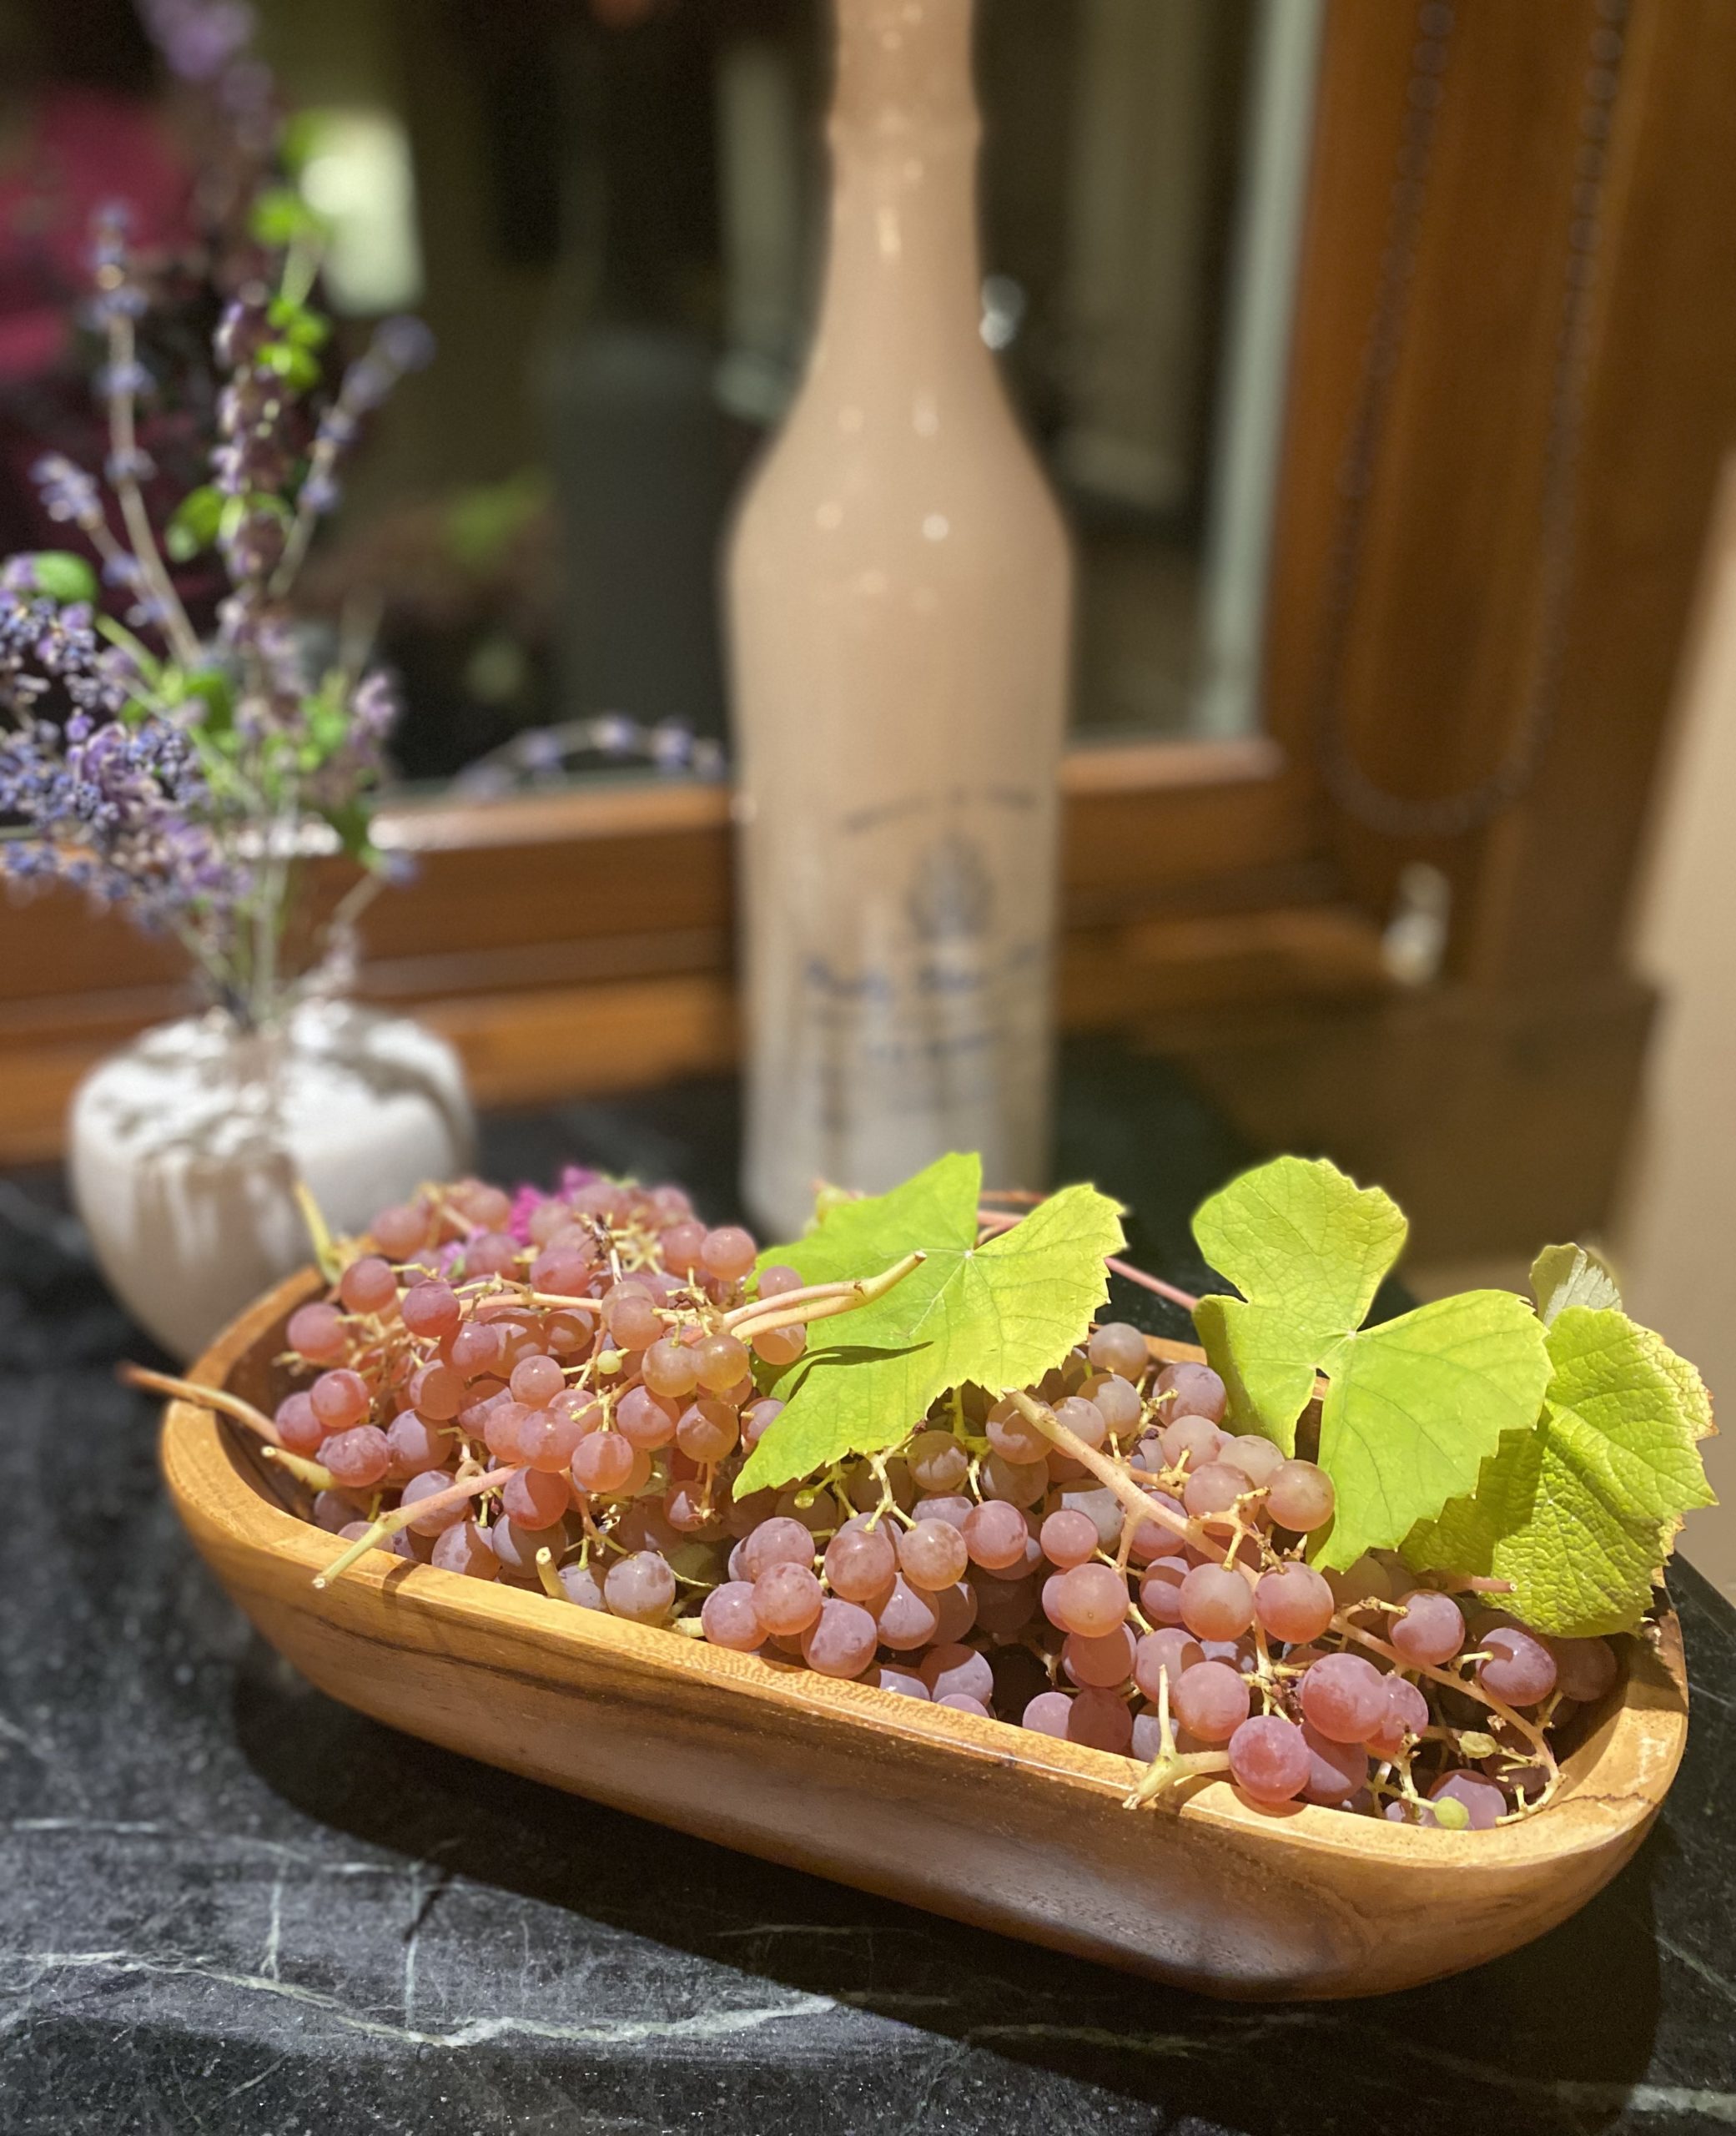 a wooden bowls filled with bunches of grapes